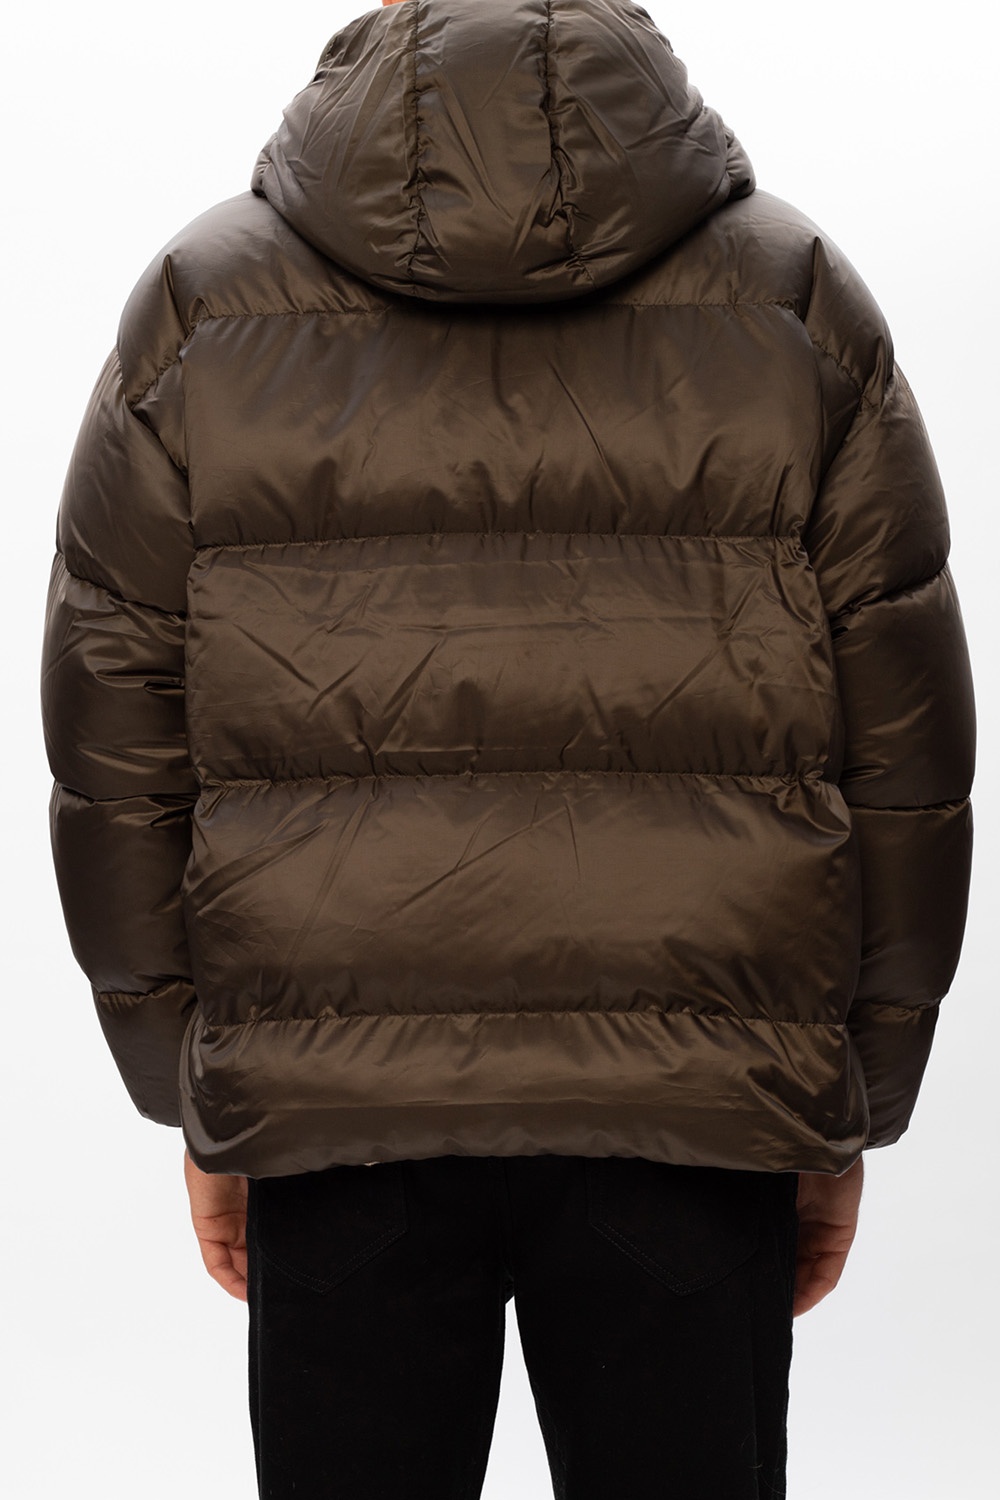 White Mountaineering Hooded down Grey jacket